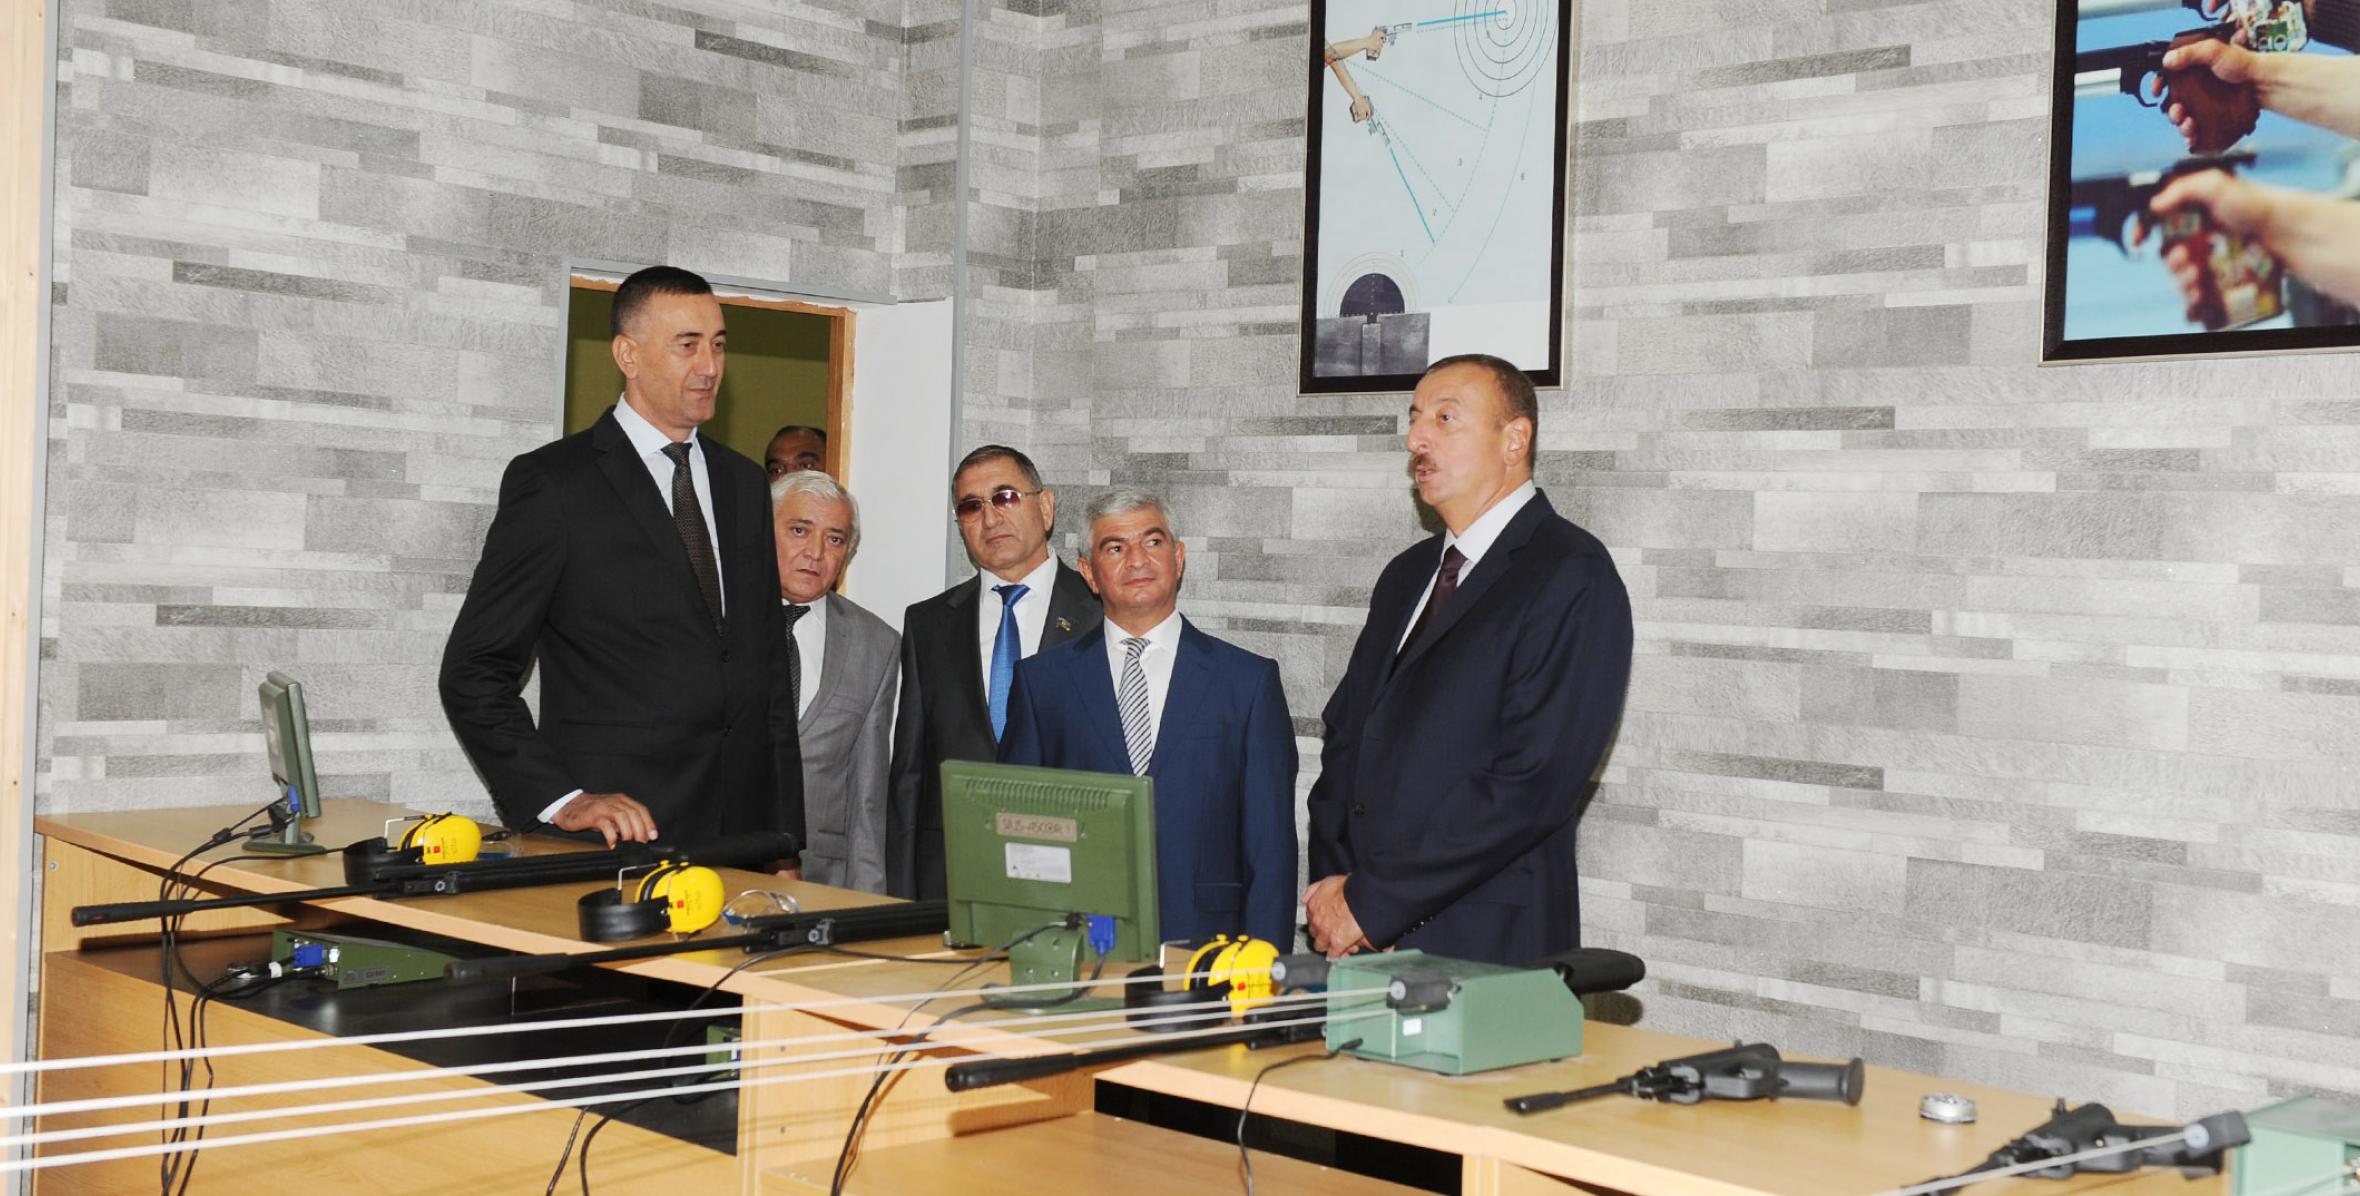 Ilham Aliyev attended the opening of a Youth Center in Agjabadi